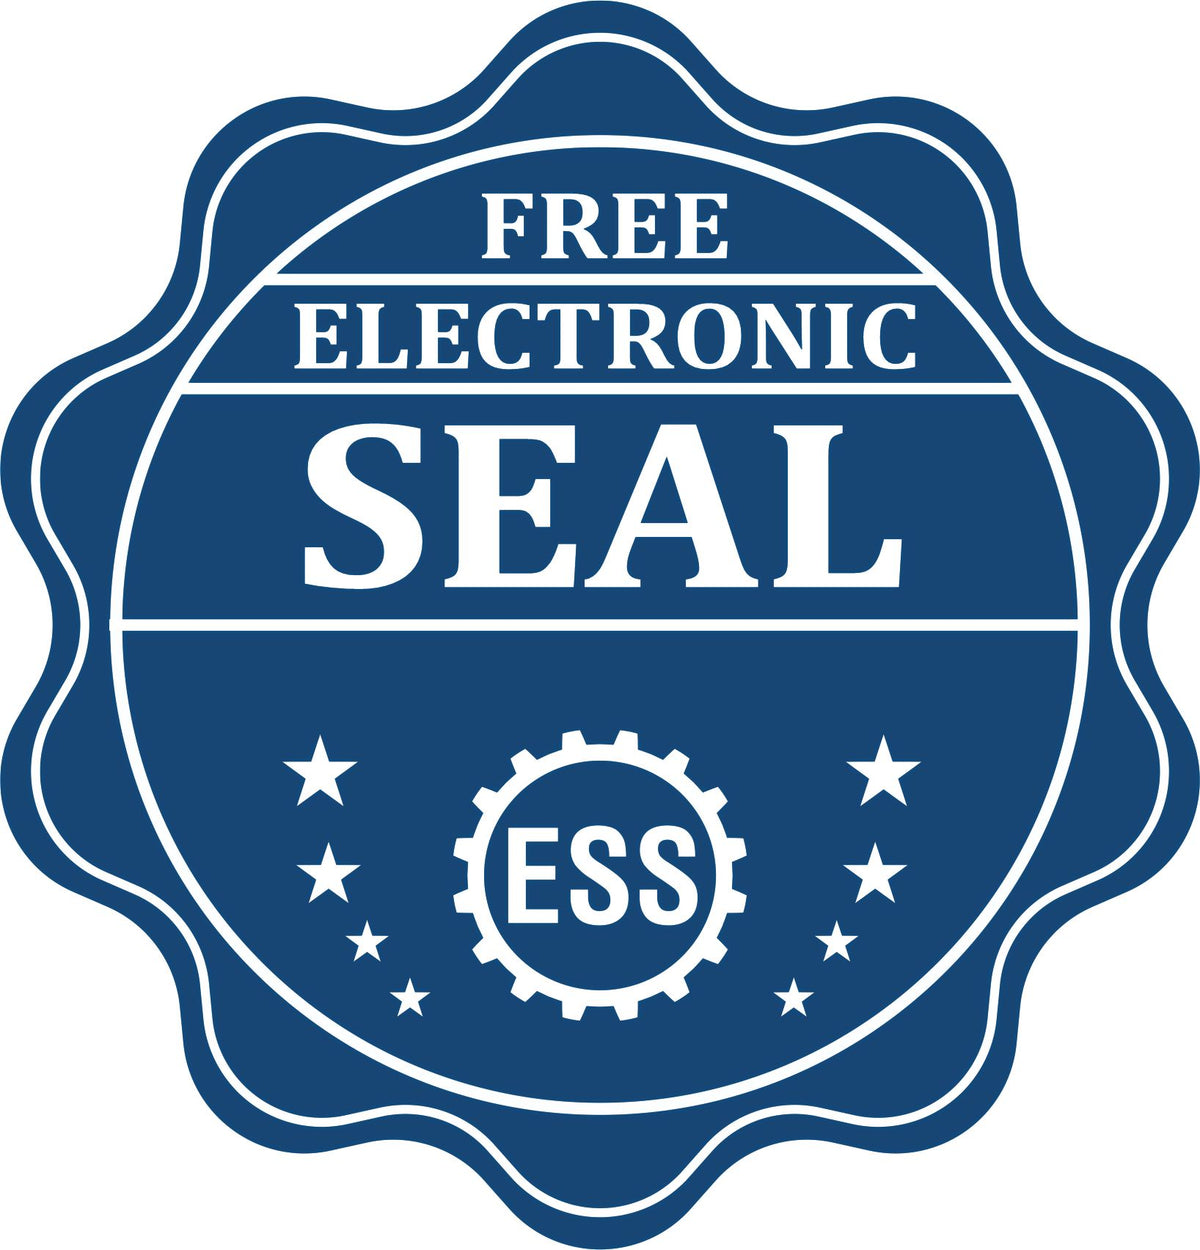 A badge showing a free electronic seal for the MaxLight Premium Pre-Inked Minnesota State Seal Notarial Stamp with stars and the ESS gear on the emblem.